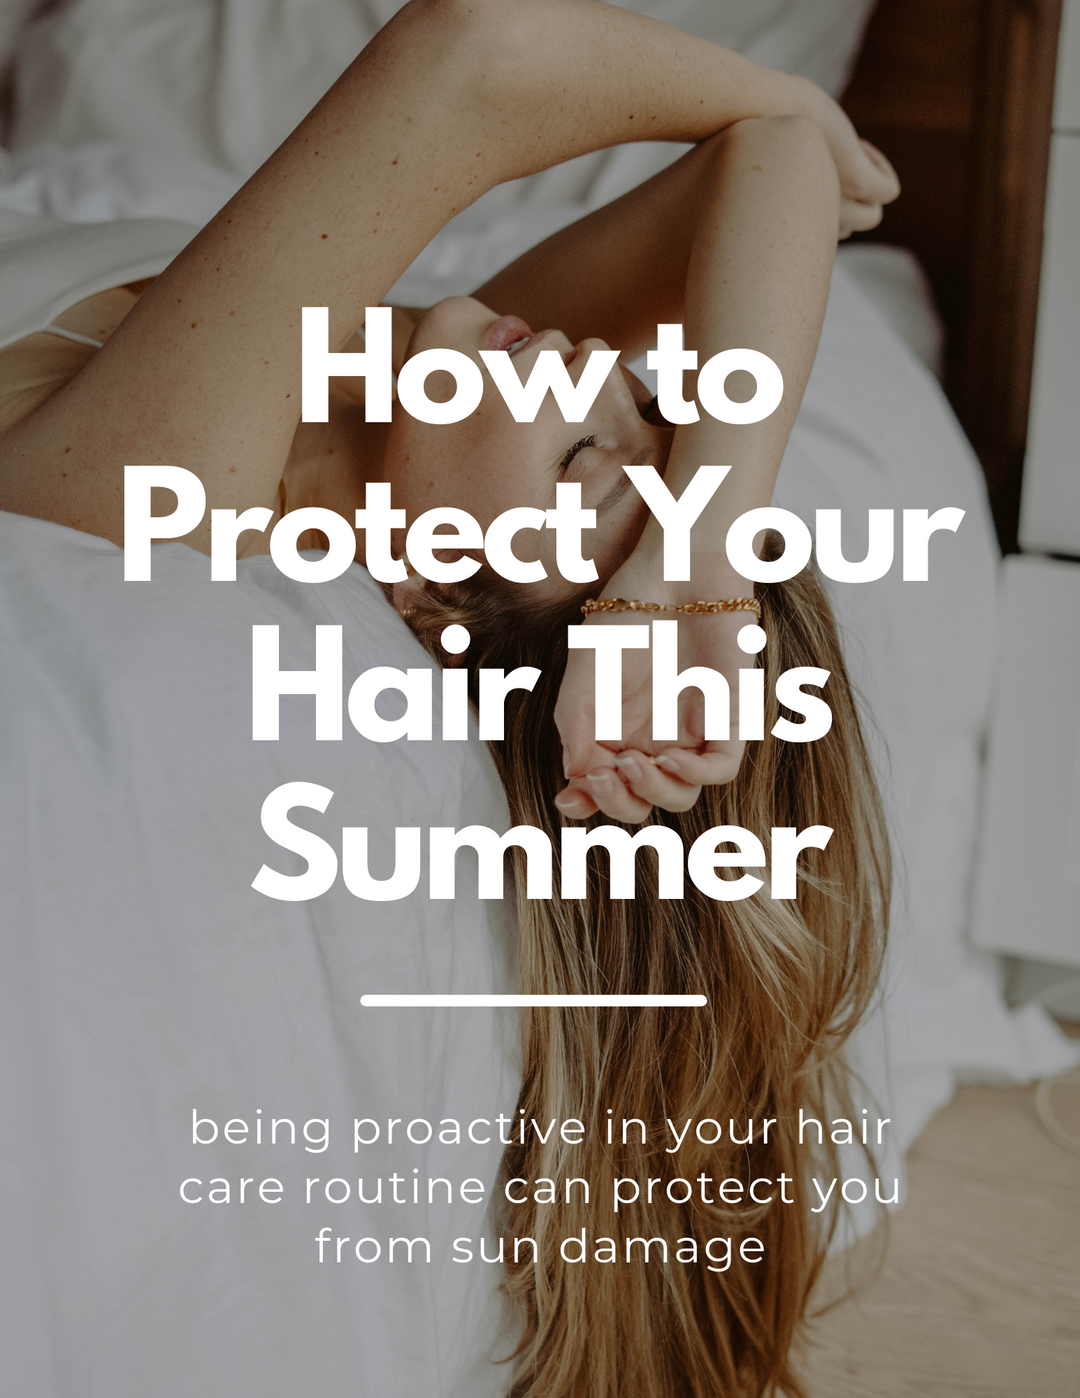 How to Protect your Hair this Summer